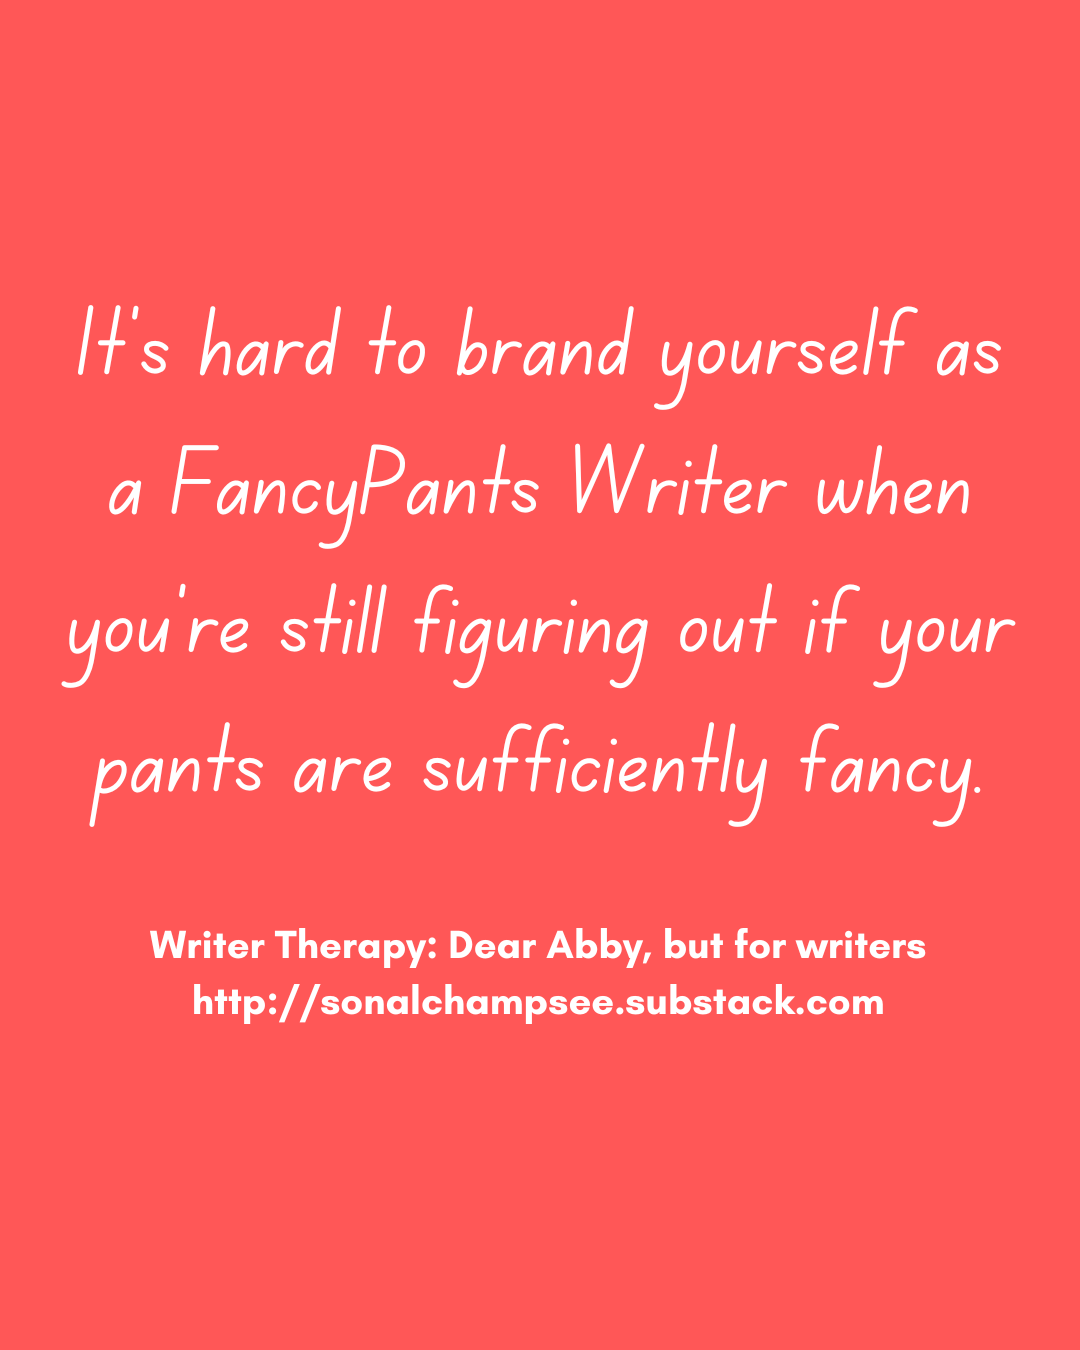 Text: It's hard to brand yourself as a FancyPants Writer when you're still figuring out if your pants are sufficiently fancy